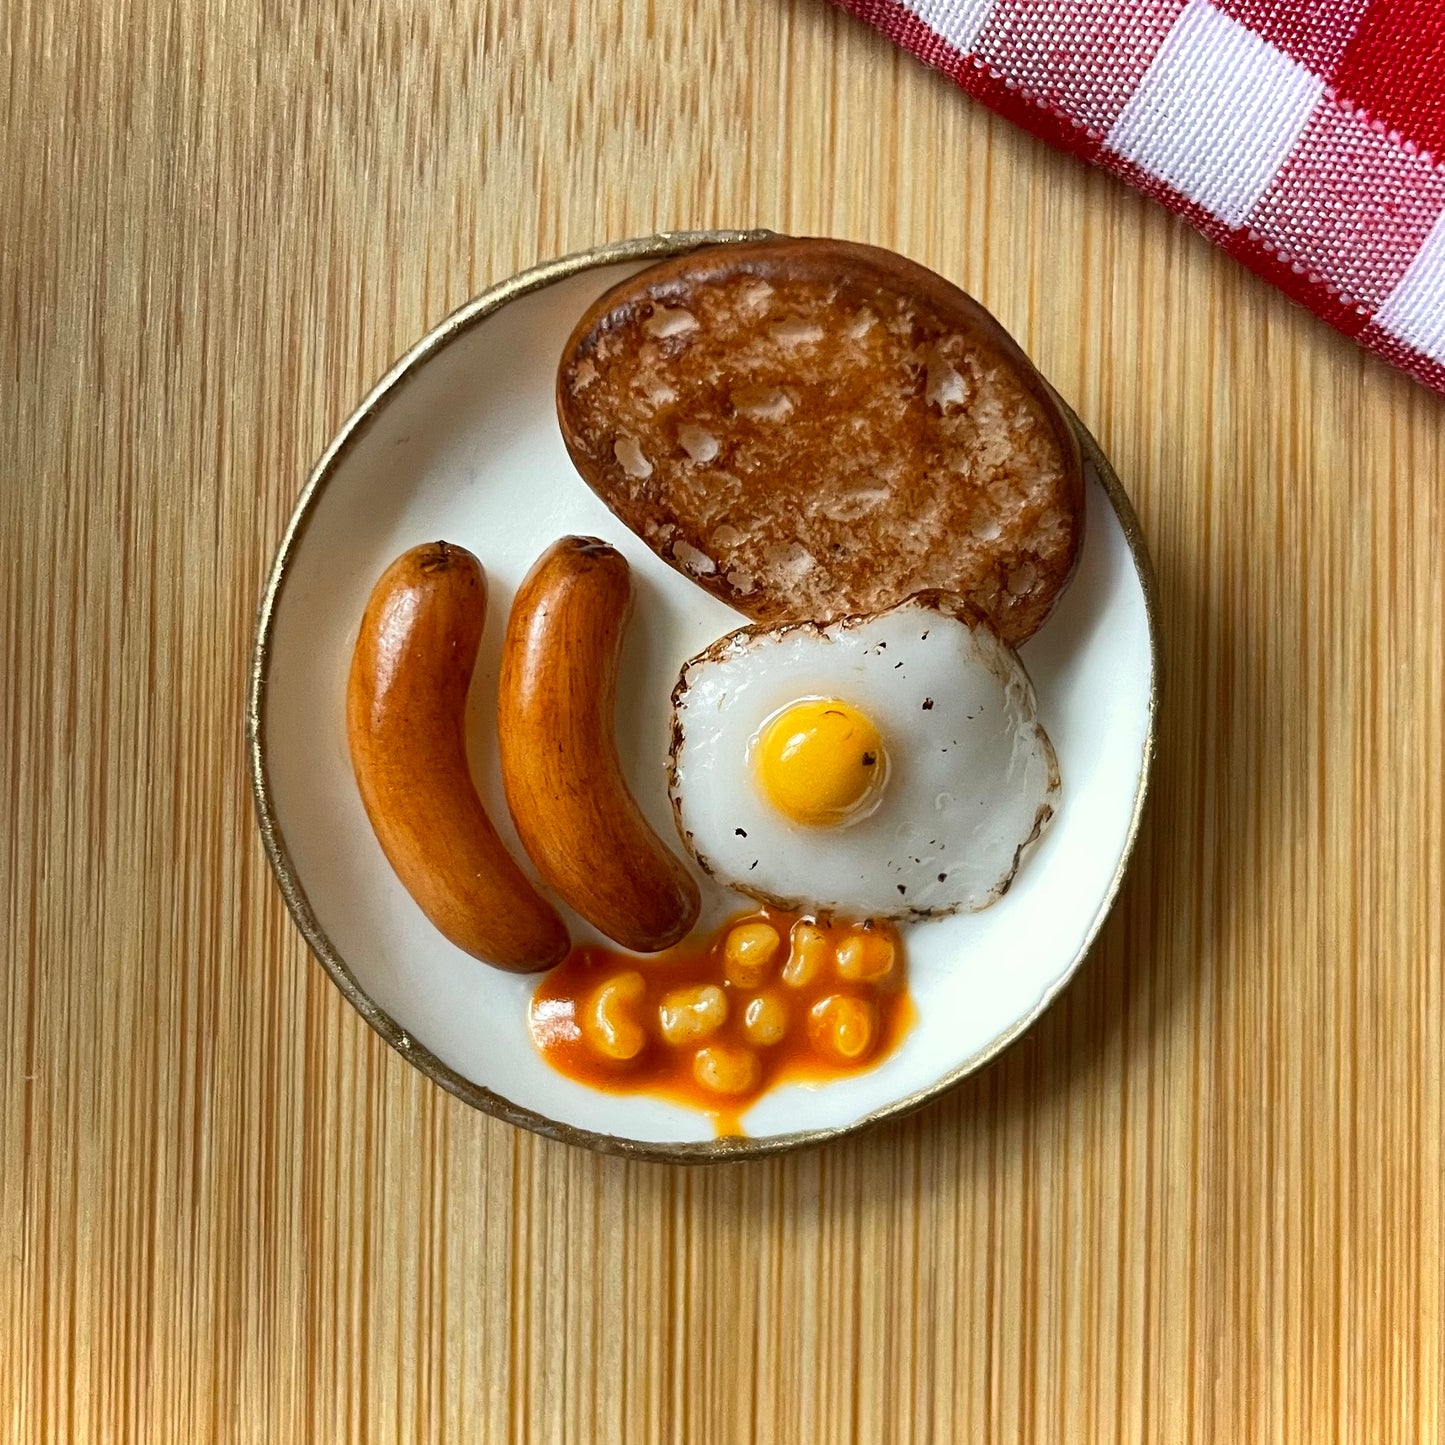 Bread Toast with Sausages, Egg & baked beans magnet